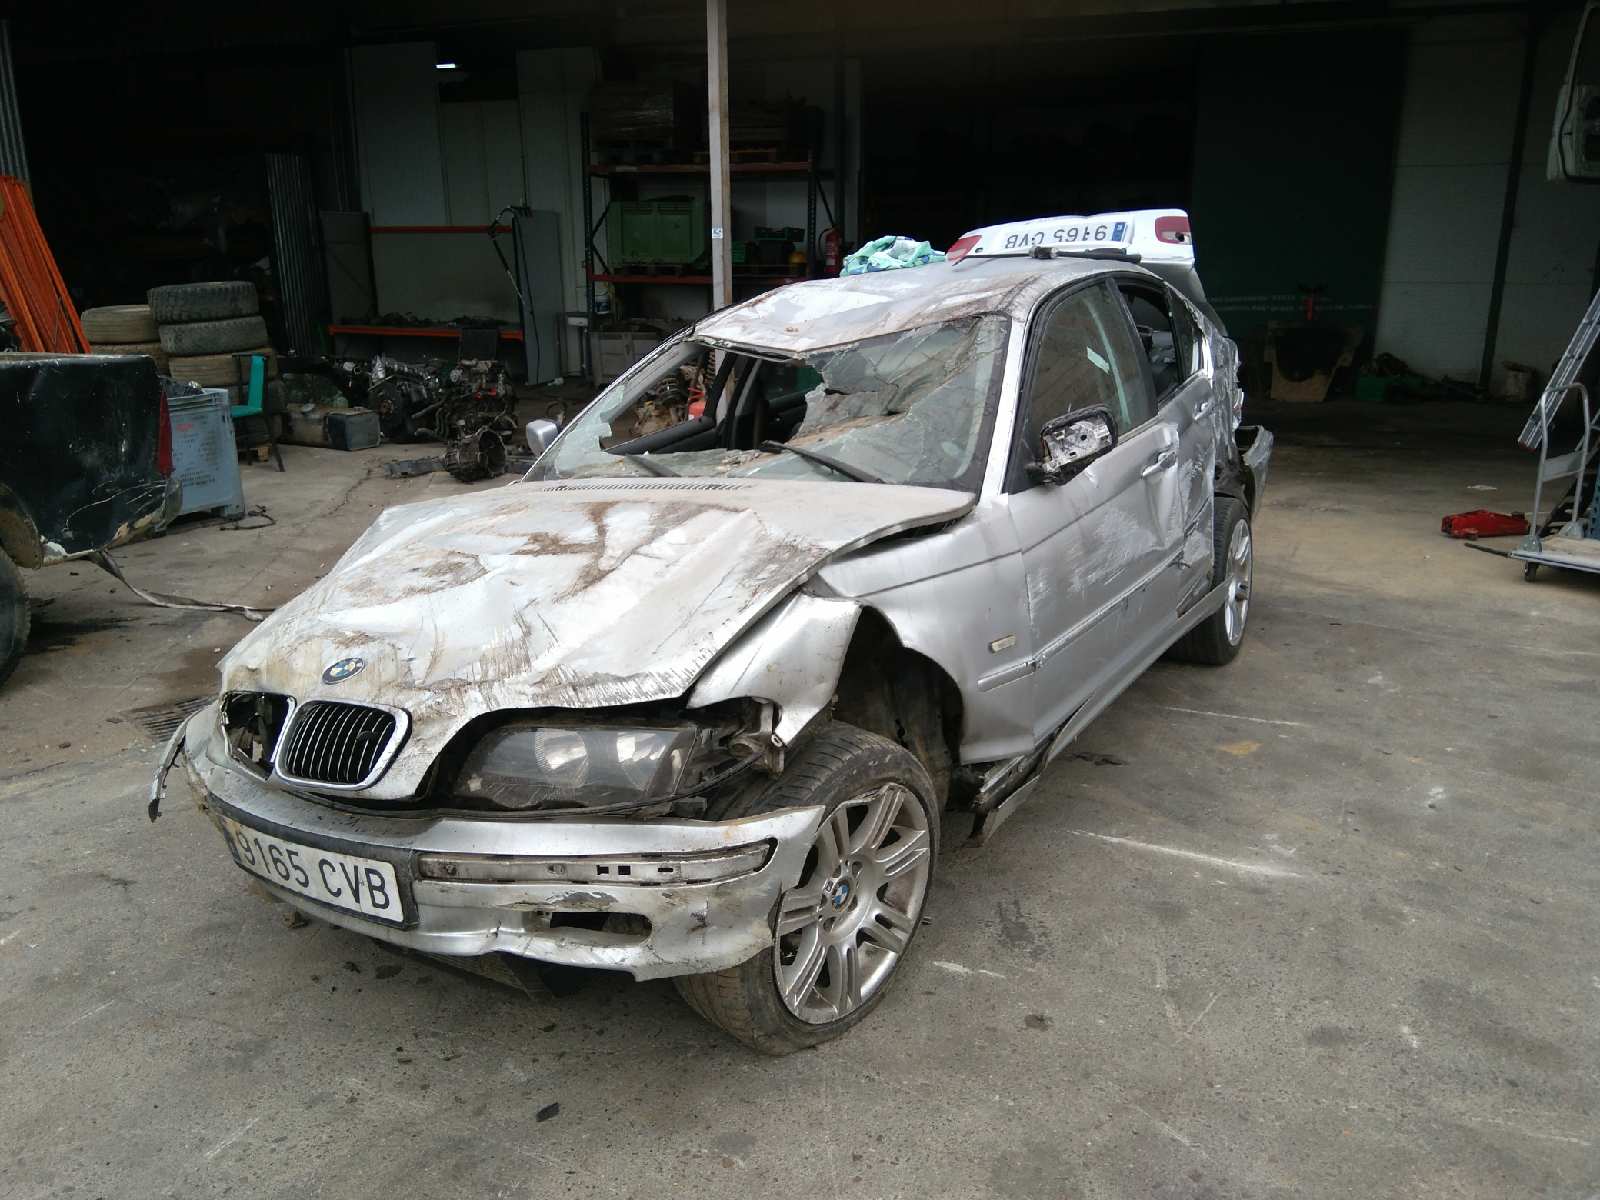 BMW 3 Series E46 (1997-2006) Other Interior Parts 676283620660, 8200717 24681630